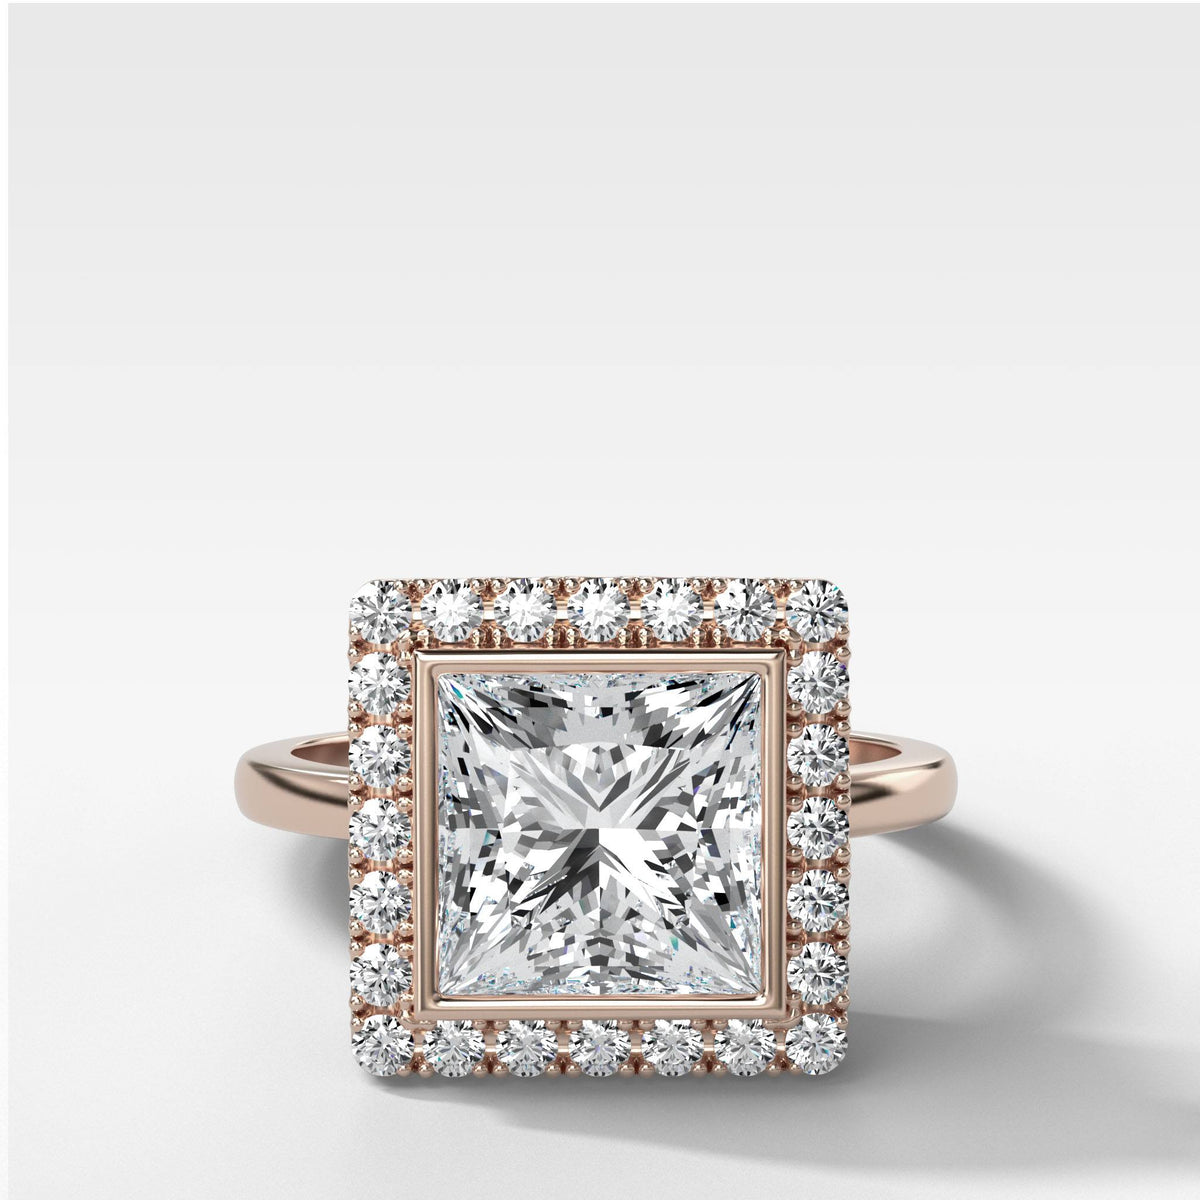 Bezel Set Halo Engagement Ring With Princess Cut by Good Stone in Rose Gold